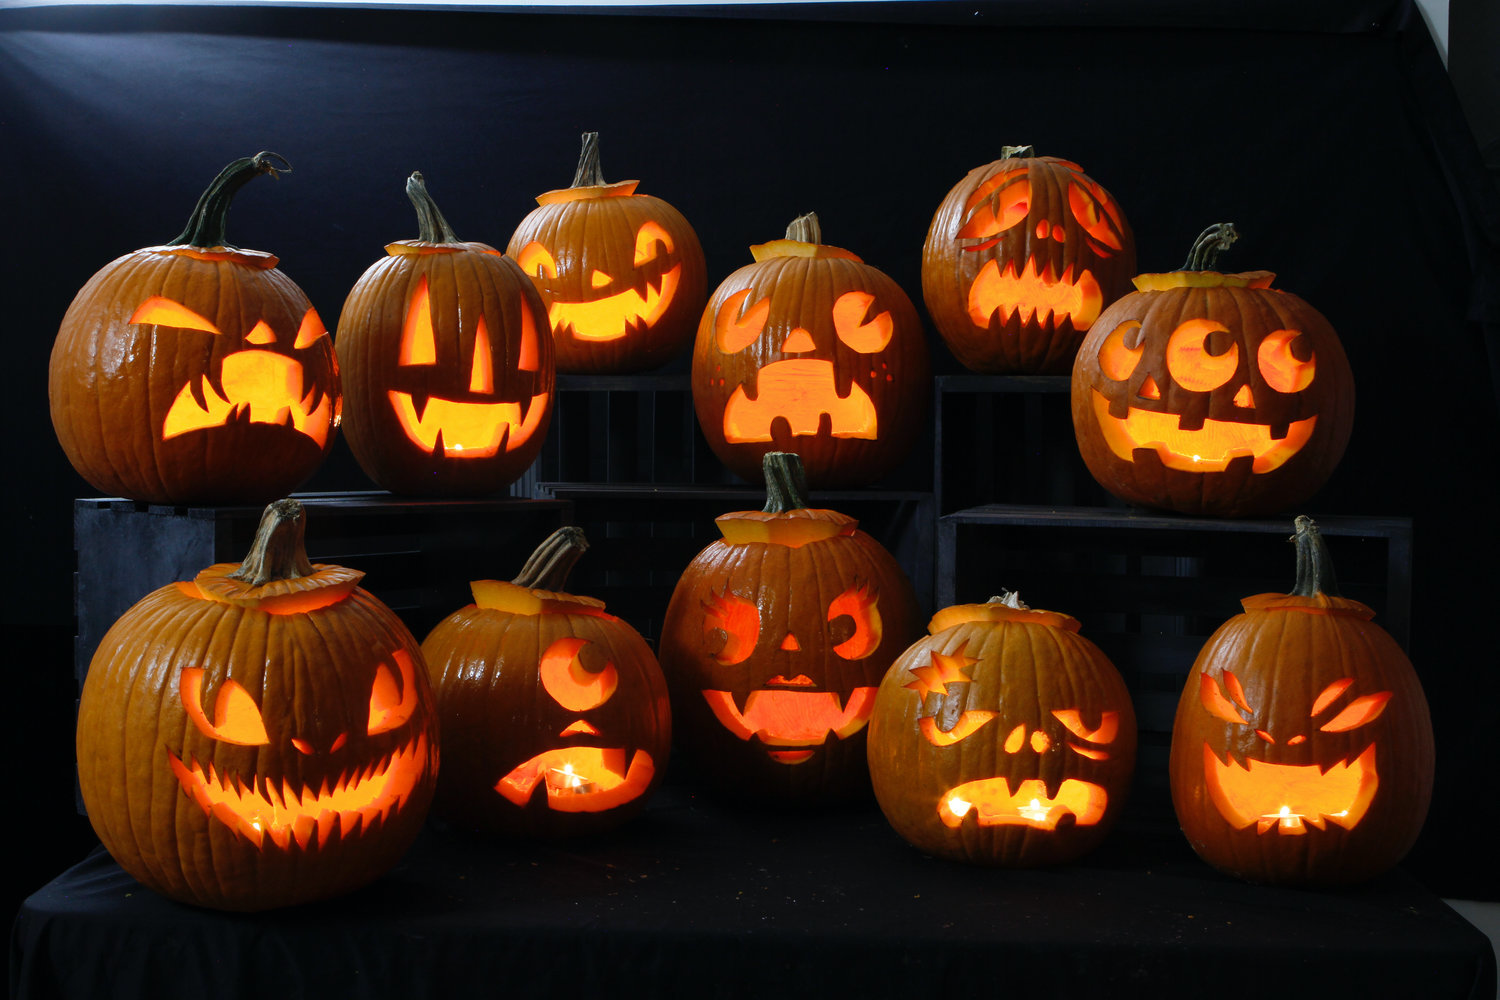 Jack o’ Lantern carving tips for students – The Guilfordian